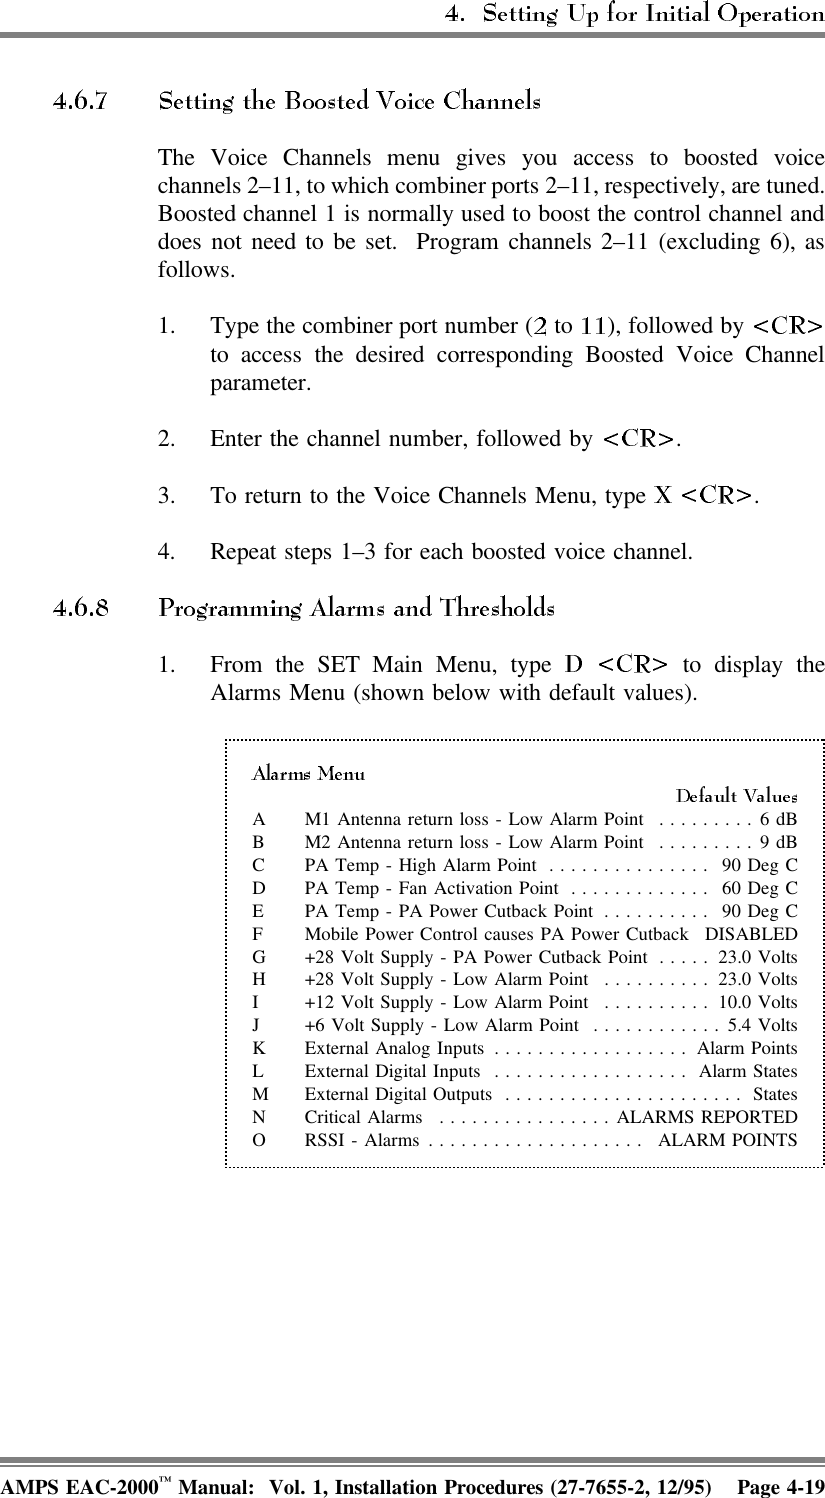 The Voice Channels menu gives you access to boosted voicechannels 2–11, to which combiner ports 2–11, respectively, are tuned.Boosted channel 1 is normally used to boost the control channel anddoes not need to be set.  Program channels 2–11 (excluding 6), asfollows.1. Type the combiner port number (  to  ), followed by to access the desired corresponding Boosted Voice Channelparameter.2. Enter the channel number, followed by  .3. To return to the Voice Channels Menu, type  .4. Repeat steps 1–3 for each boosted voice channel.1. From the SET Main Menu, type   to display theAlarms Menu (shown below with default values).A M1 Antenna return loss - Low Alarm Point  .........6 dBB M2 Antenna return loss - Low Alarm Point  .........9 dBC PA Temp - High Alarm Point ............... 90 Deg CD PA Temp - Fan Activation Point ............. 60 Deg CE PA Temp - PA Power Cutback Point .......... 90 Deg CF Mobile Power Control causes PA Power Cutback DISABLEDG +28 Volt Supply - PA Power Cutback Point ..... 23.0 VoltsH +28 Volt Supply - Low Alarm Point .......... 23.0 VoltsI +12 Volt Supply - Low Alarm Point .......... 10.0 VoltsJ +6 Volt Supply - Low Alarm Point ............5.4 VoltsK External Analog Inputs .................. Alarm PointsL External Digital Inputs .................. Alarm StatesM External Digital Outputs ...................... StatesN Critical Alarms ................ALARMS REPORTEDO RSSI - Alarms .................... ALARM POINTSAMPS EAC-2000™ Manual:  Vol. 1, Installation Procedures (27-7655-2, 12/95) Page 4-19